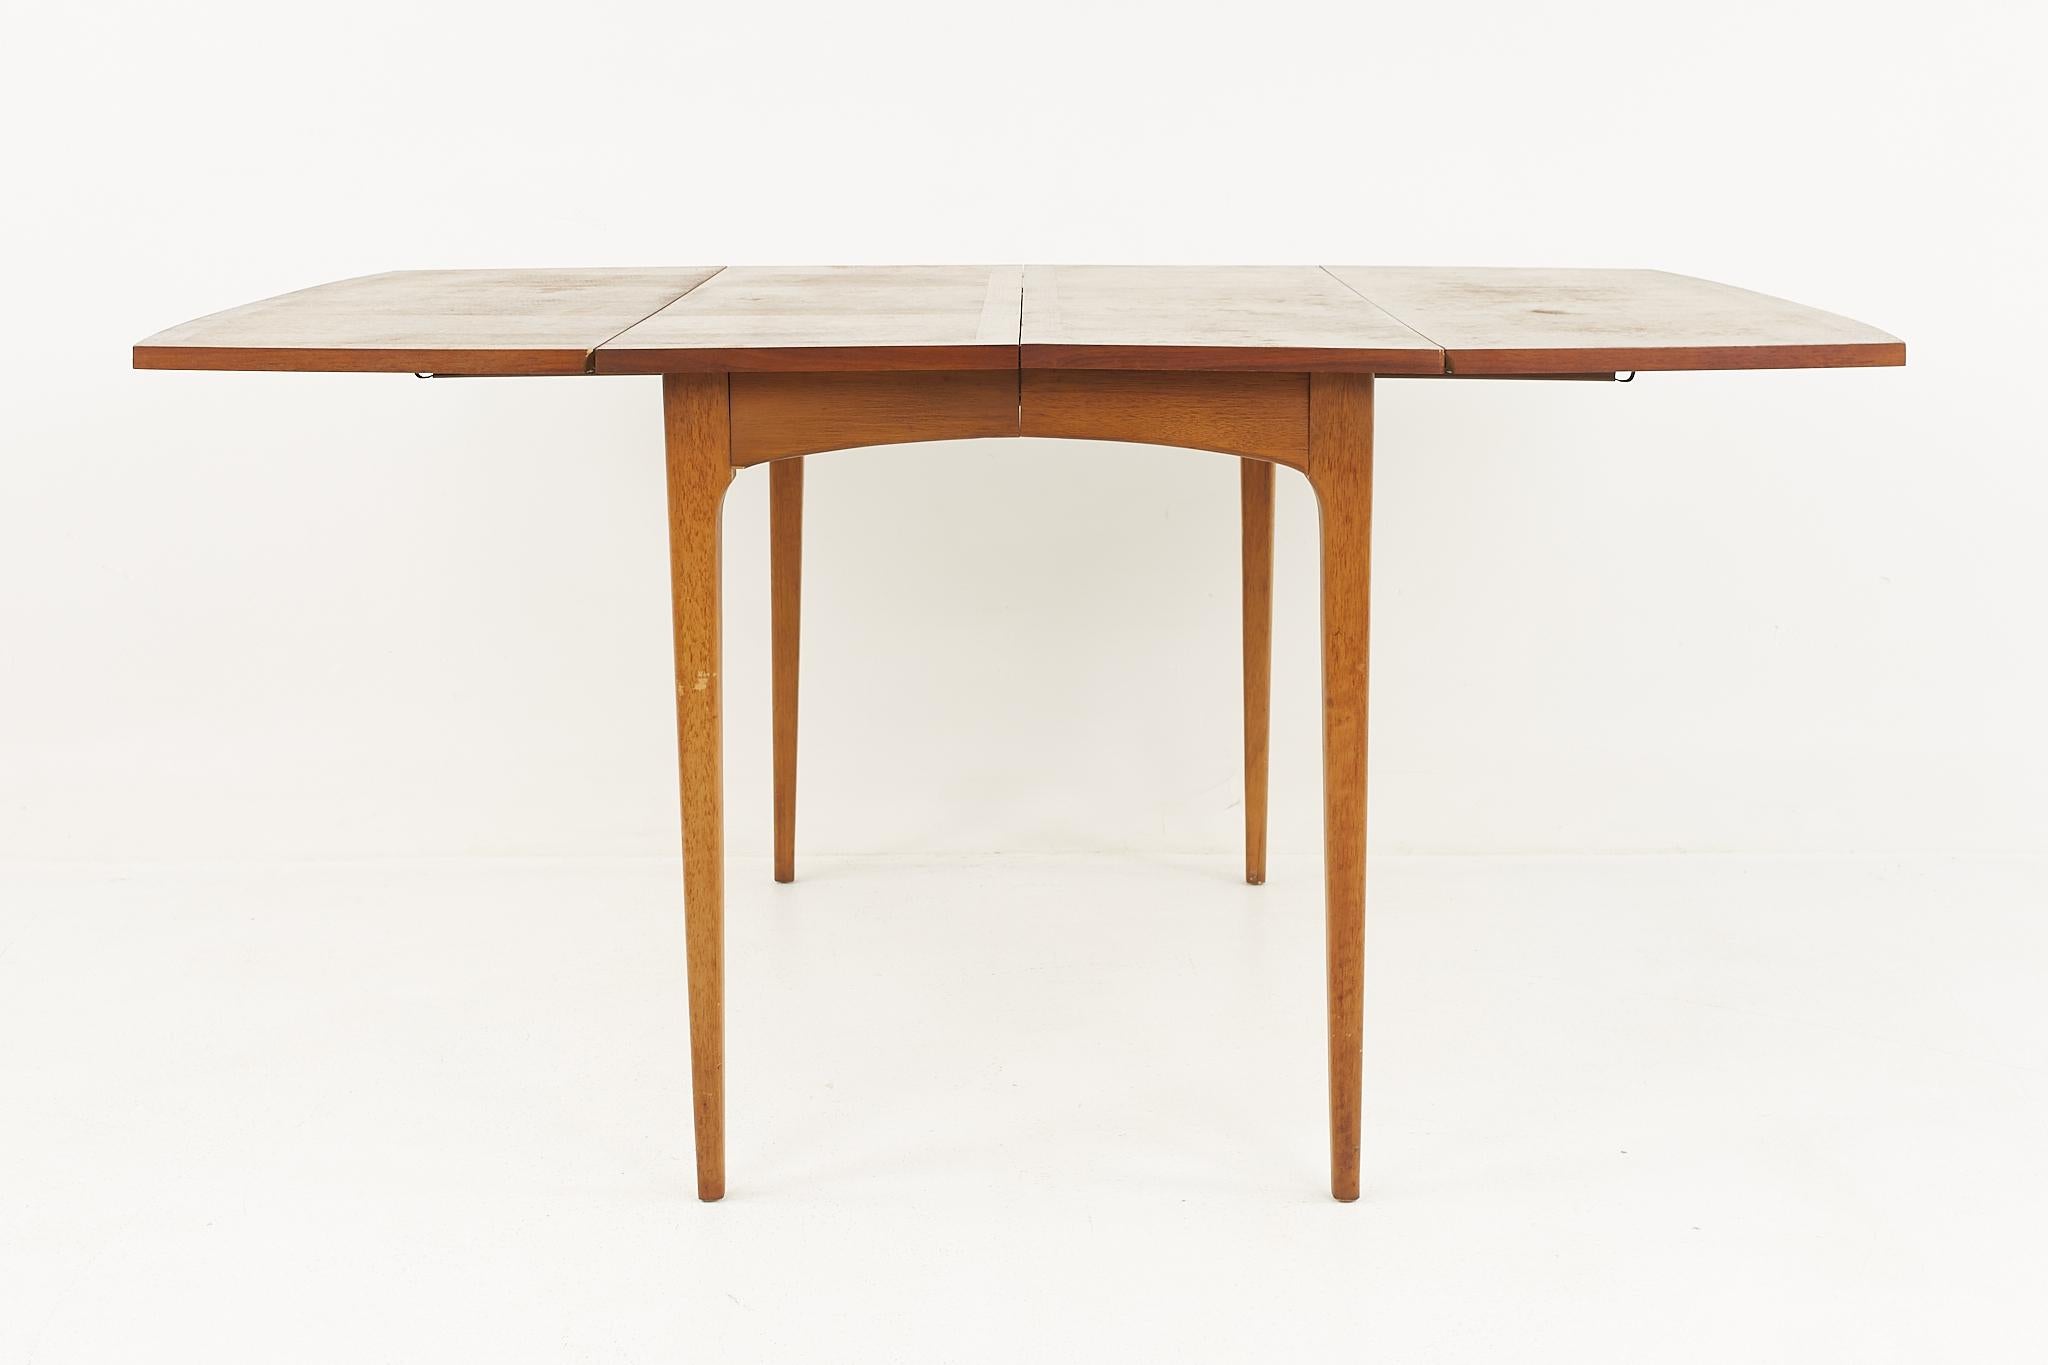 American Lane Rhythm Mid-Century Walnut Drop Leaf Expanding Dining Table with 2 Leaves For Sale